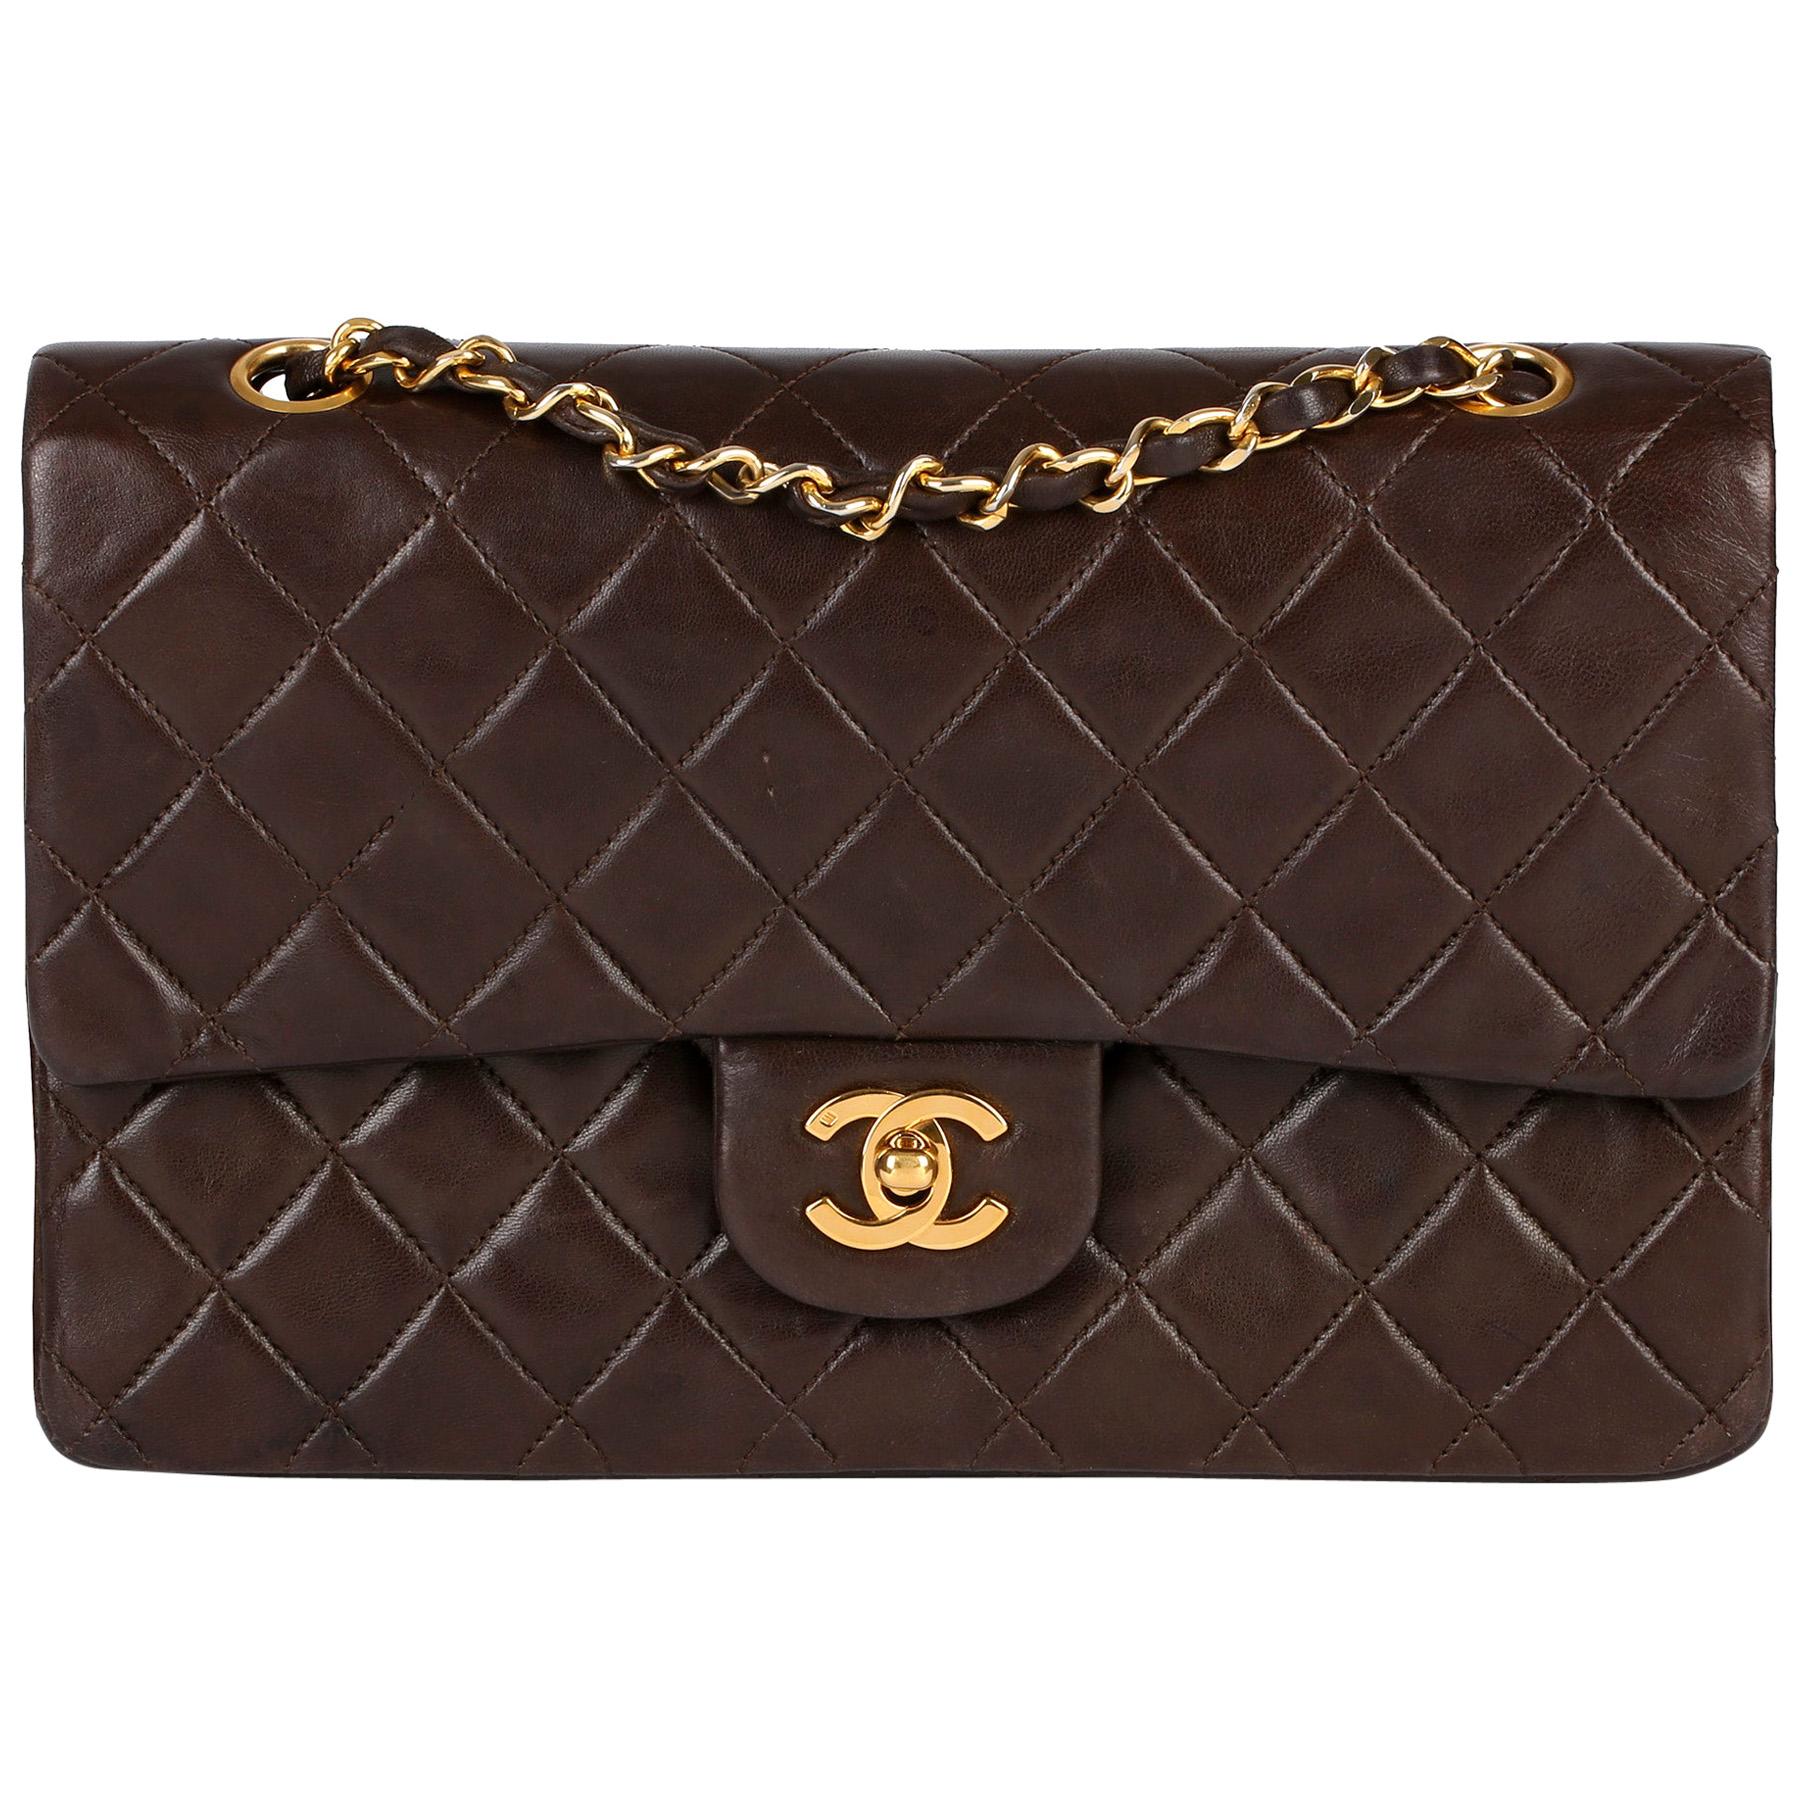 1991 Chanel Brown Quilted Lambskin Vintage Medium Classic Double Flap Bag 